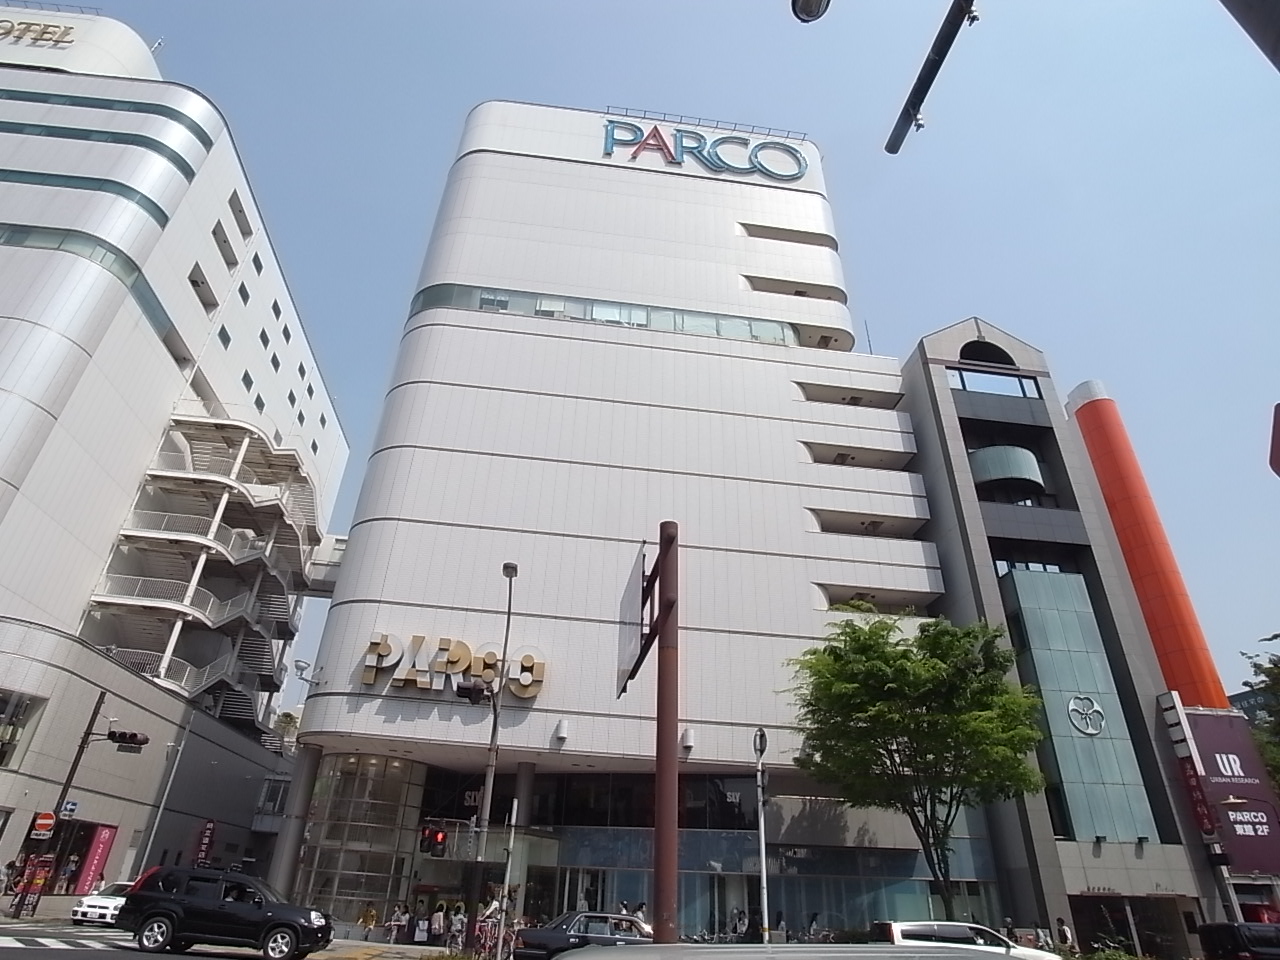 Shopping centre. 736m to Nagoya PARCO store (shopping center)